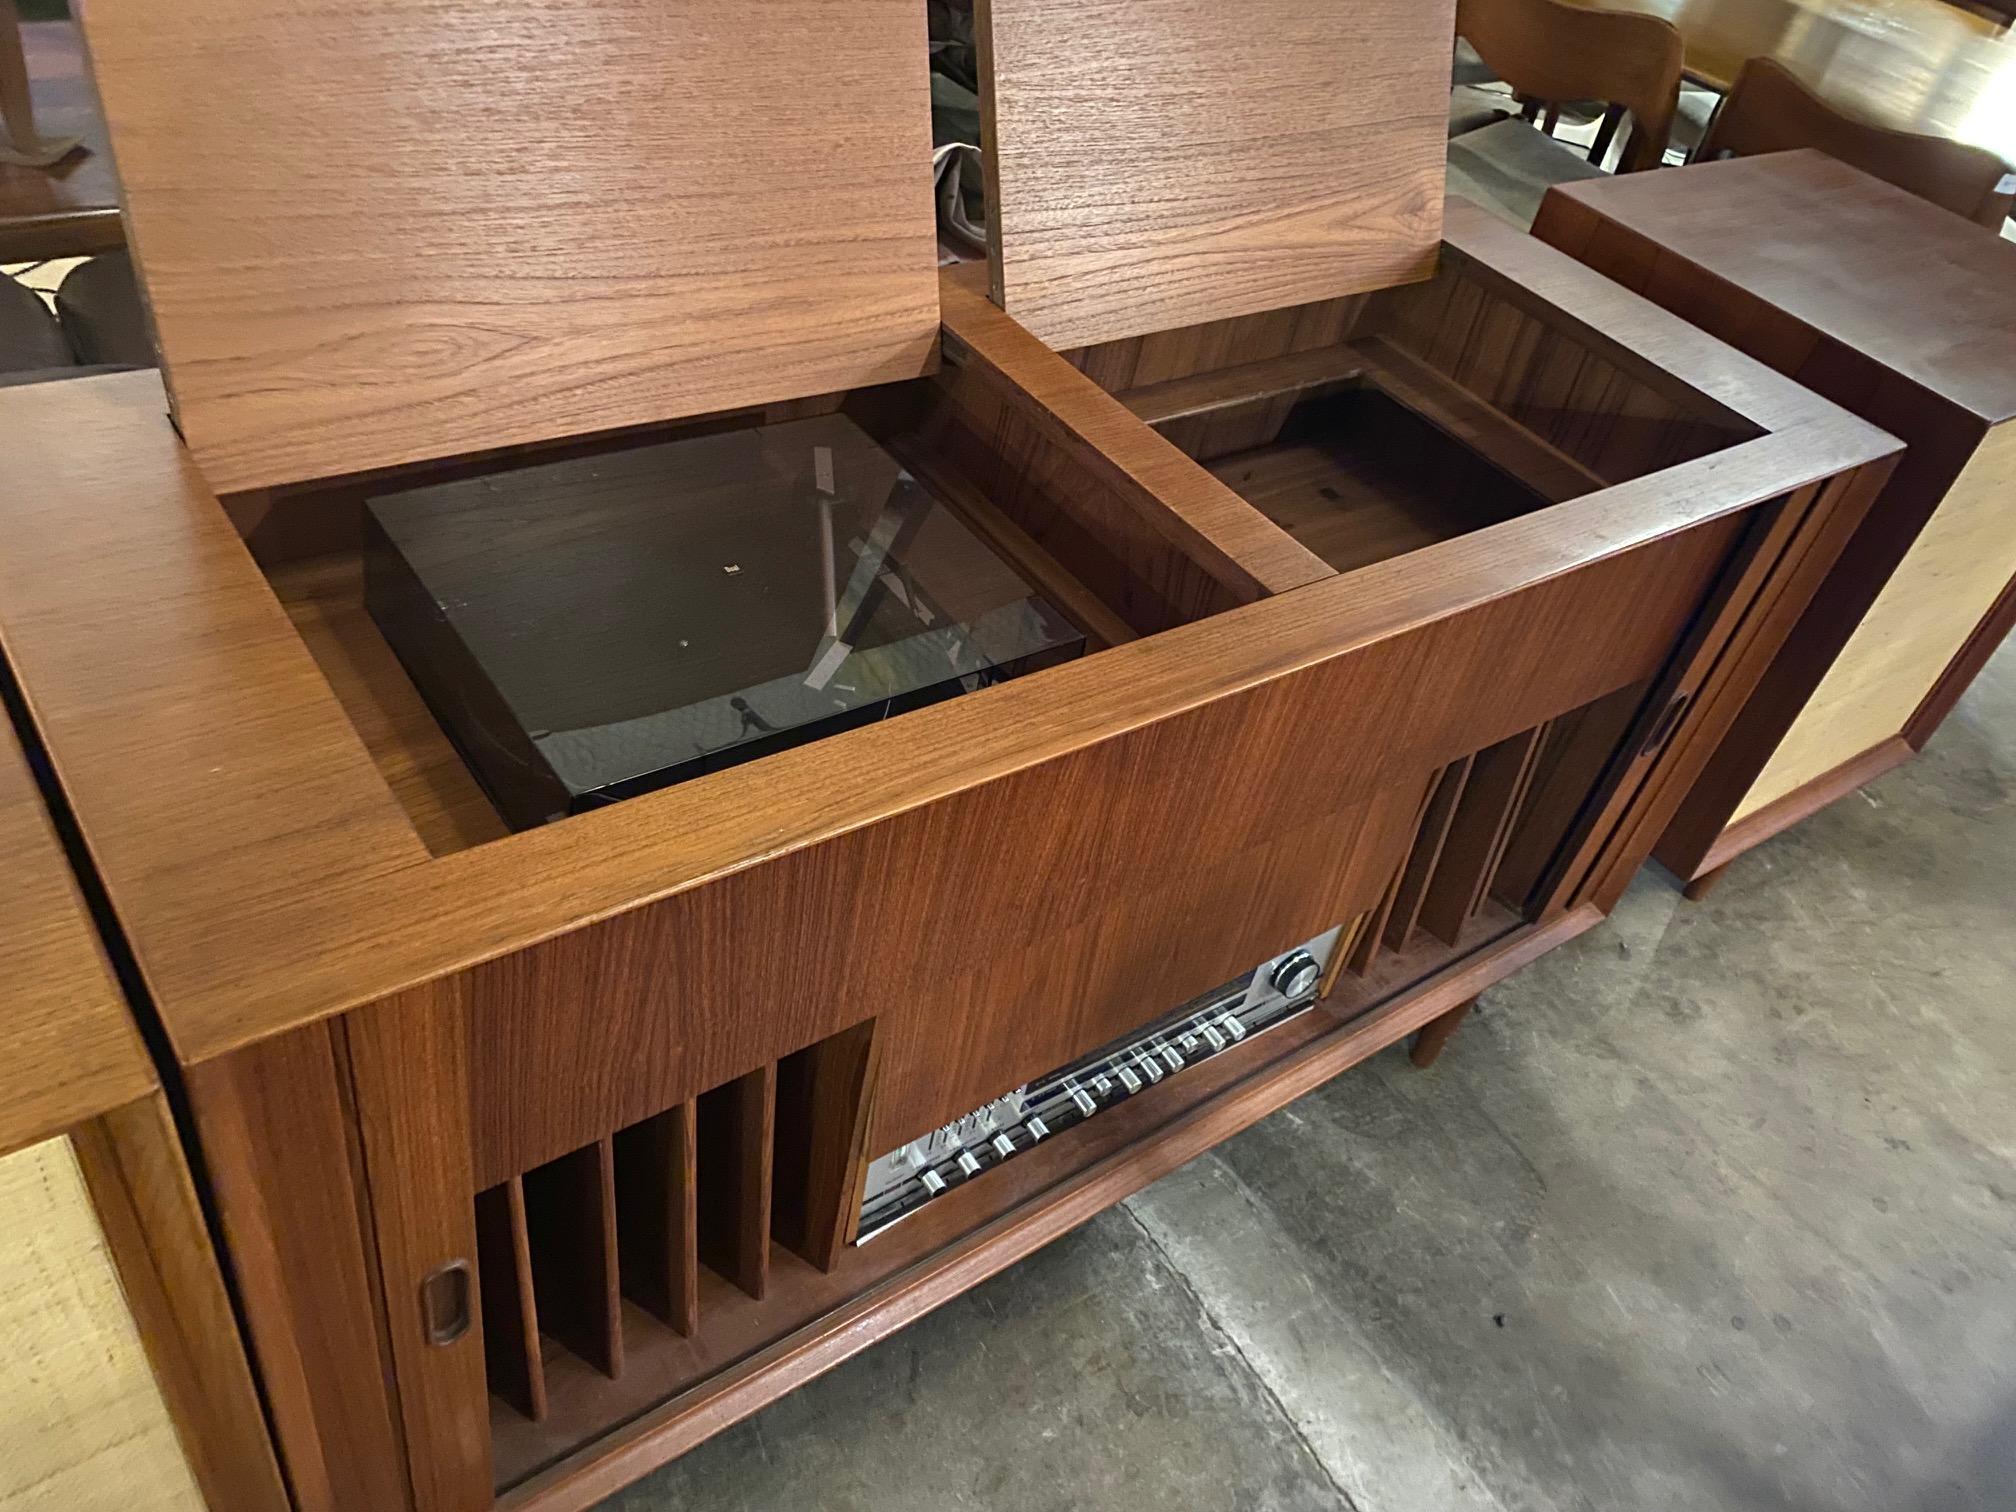 Stunning Danish teak stereo console with tambour doors made by Arne Vodder for Sibast offers speaker cabinets, storage and can be setup with stereo components. Top features drop-in element to accommodate turntable. This vintage mid-century console